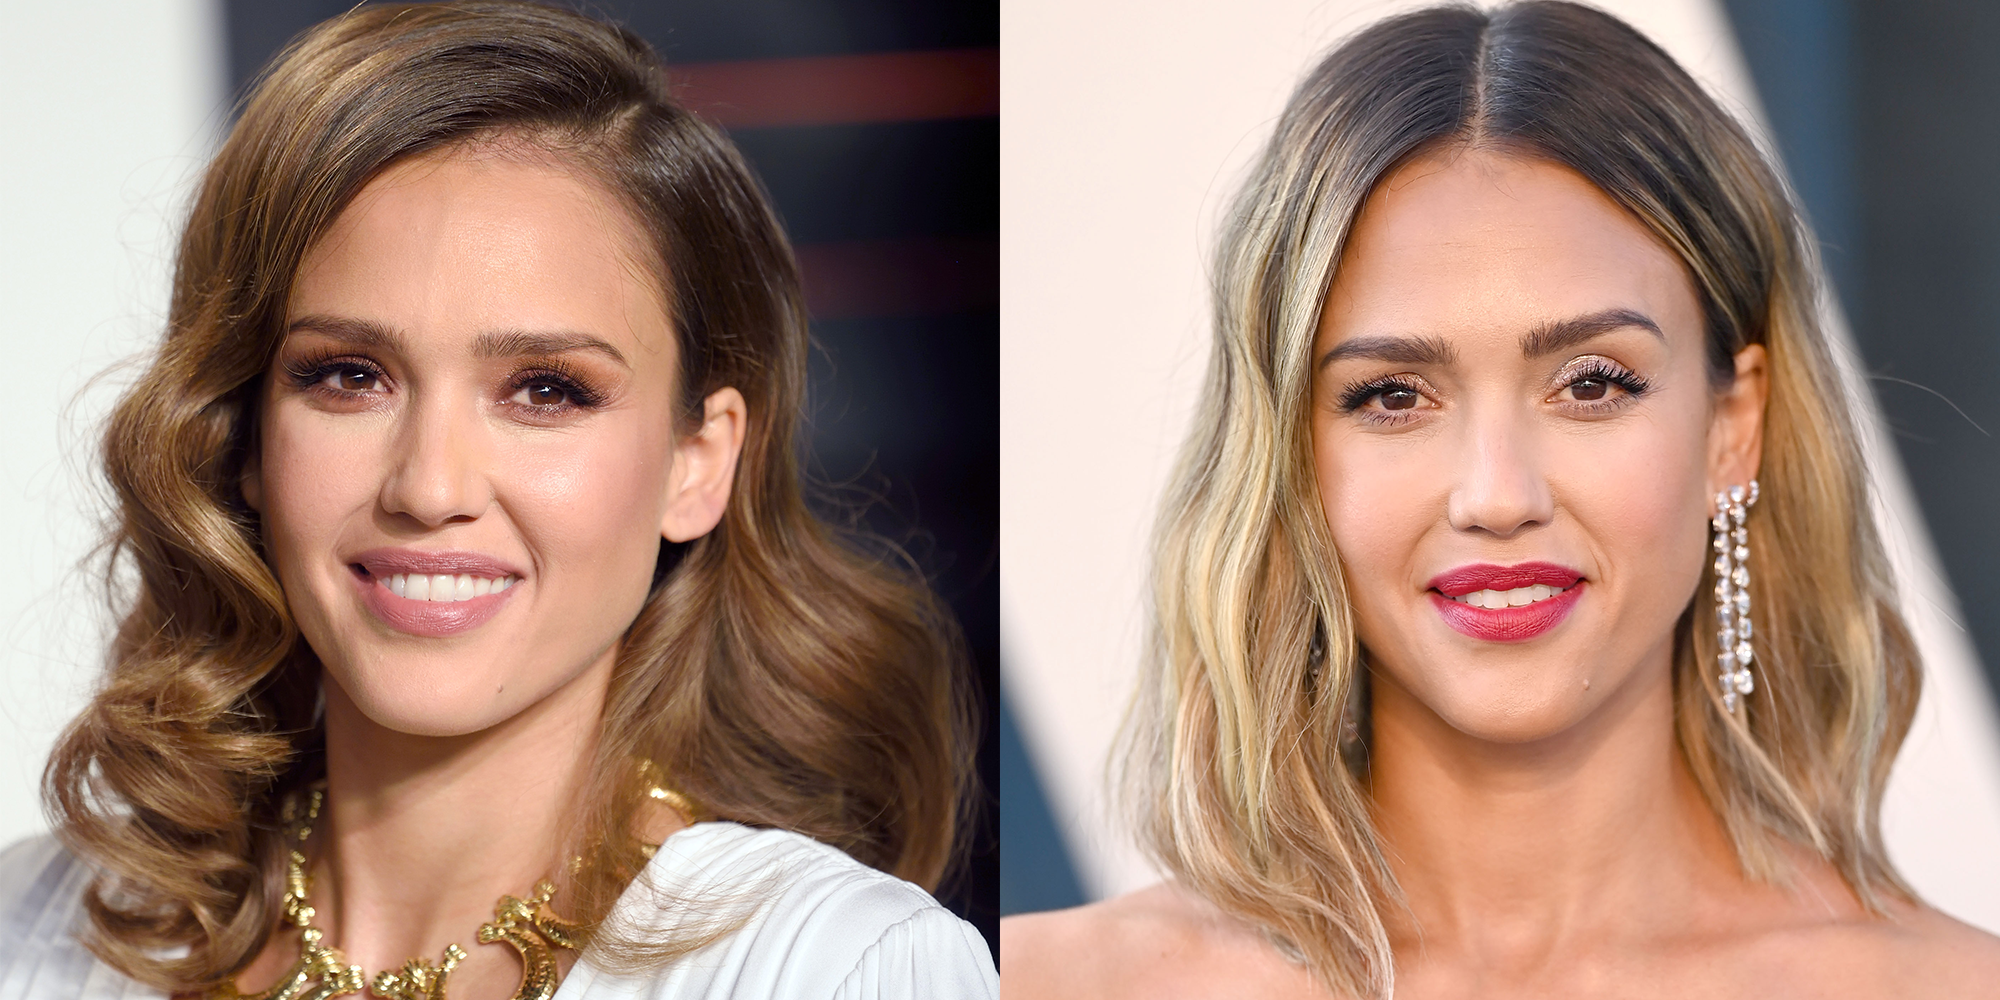 Six Celebrities Rocking The Slicked-Back Hair Trend